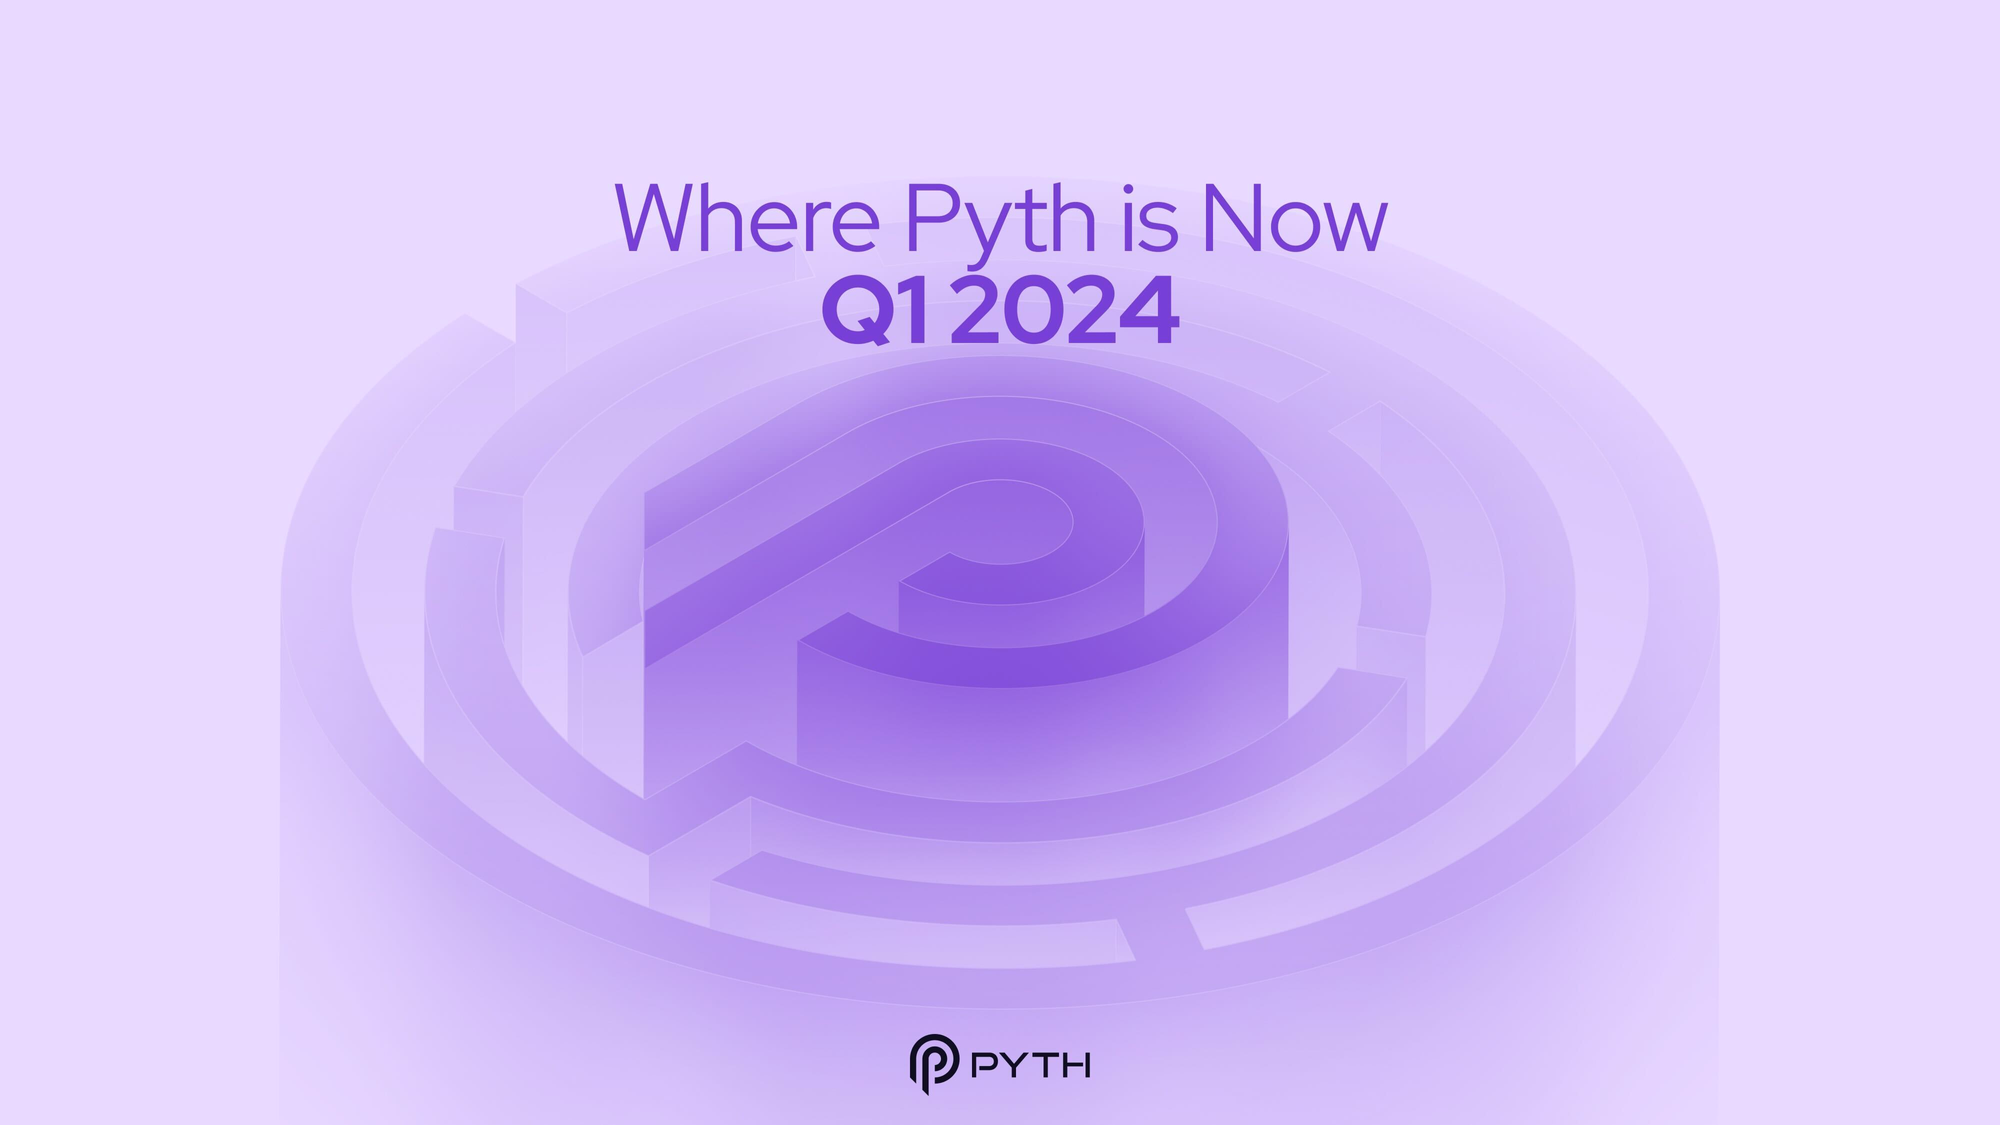 Where Pyth is Now | Q1 2024